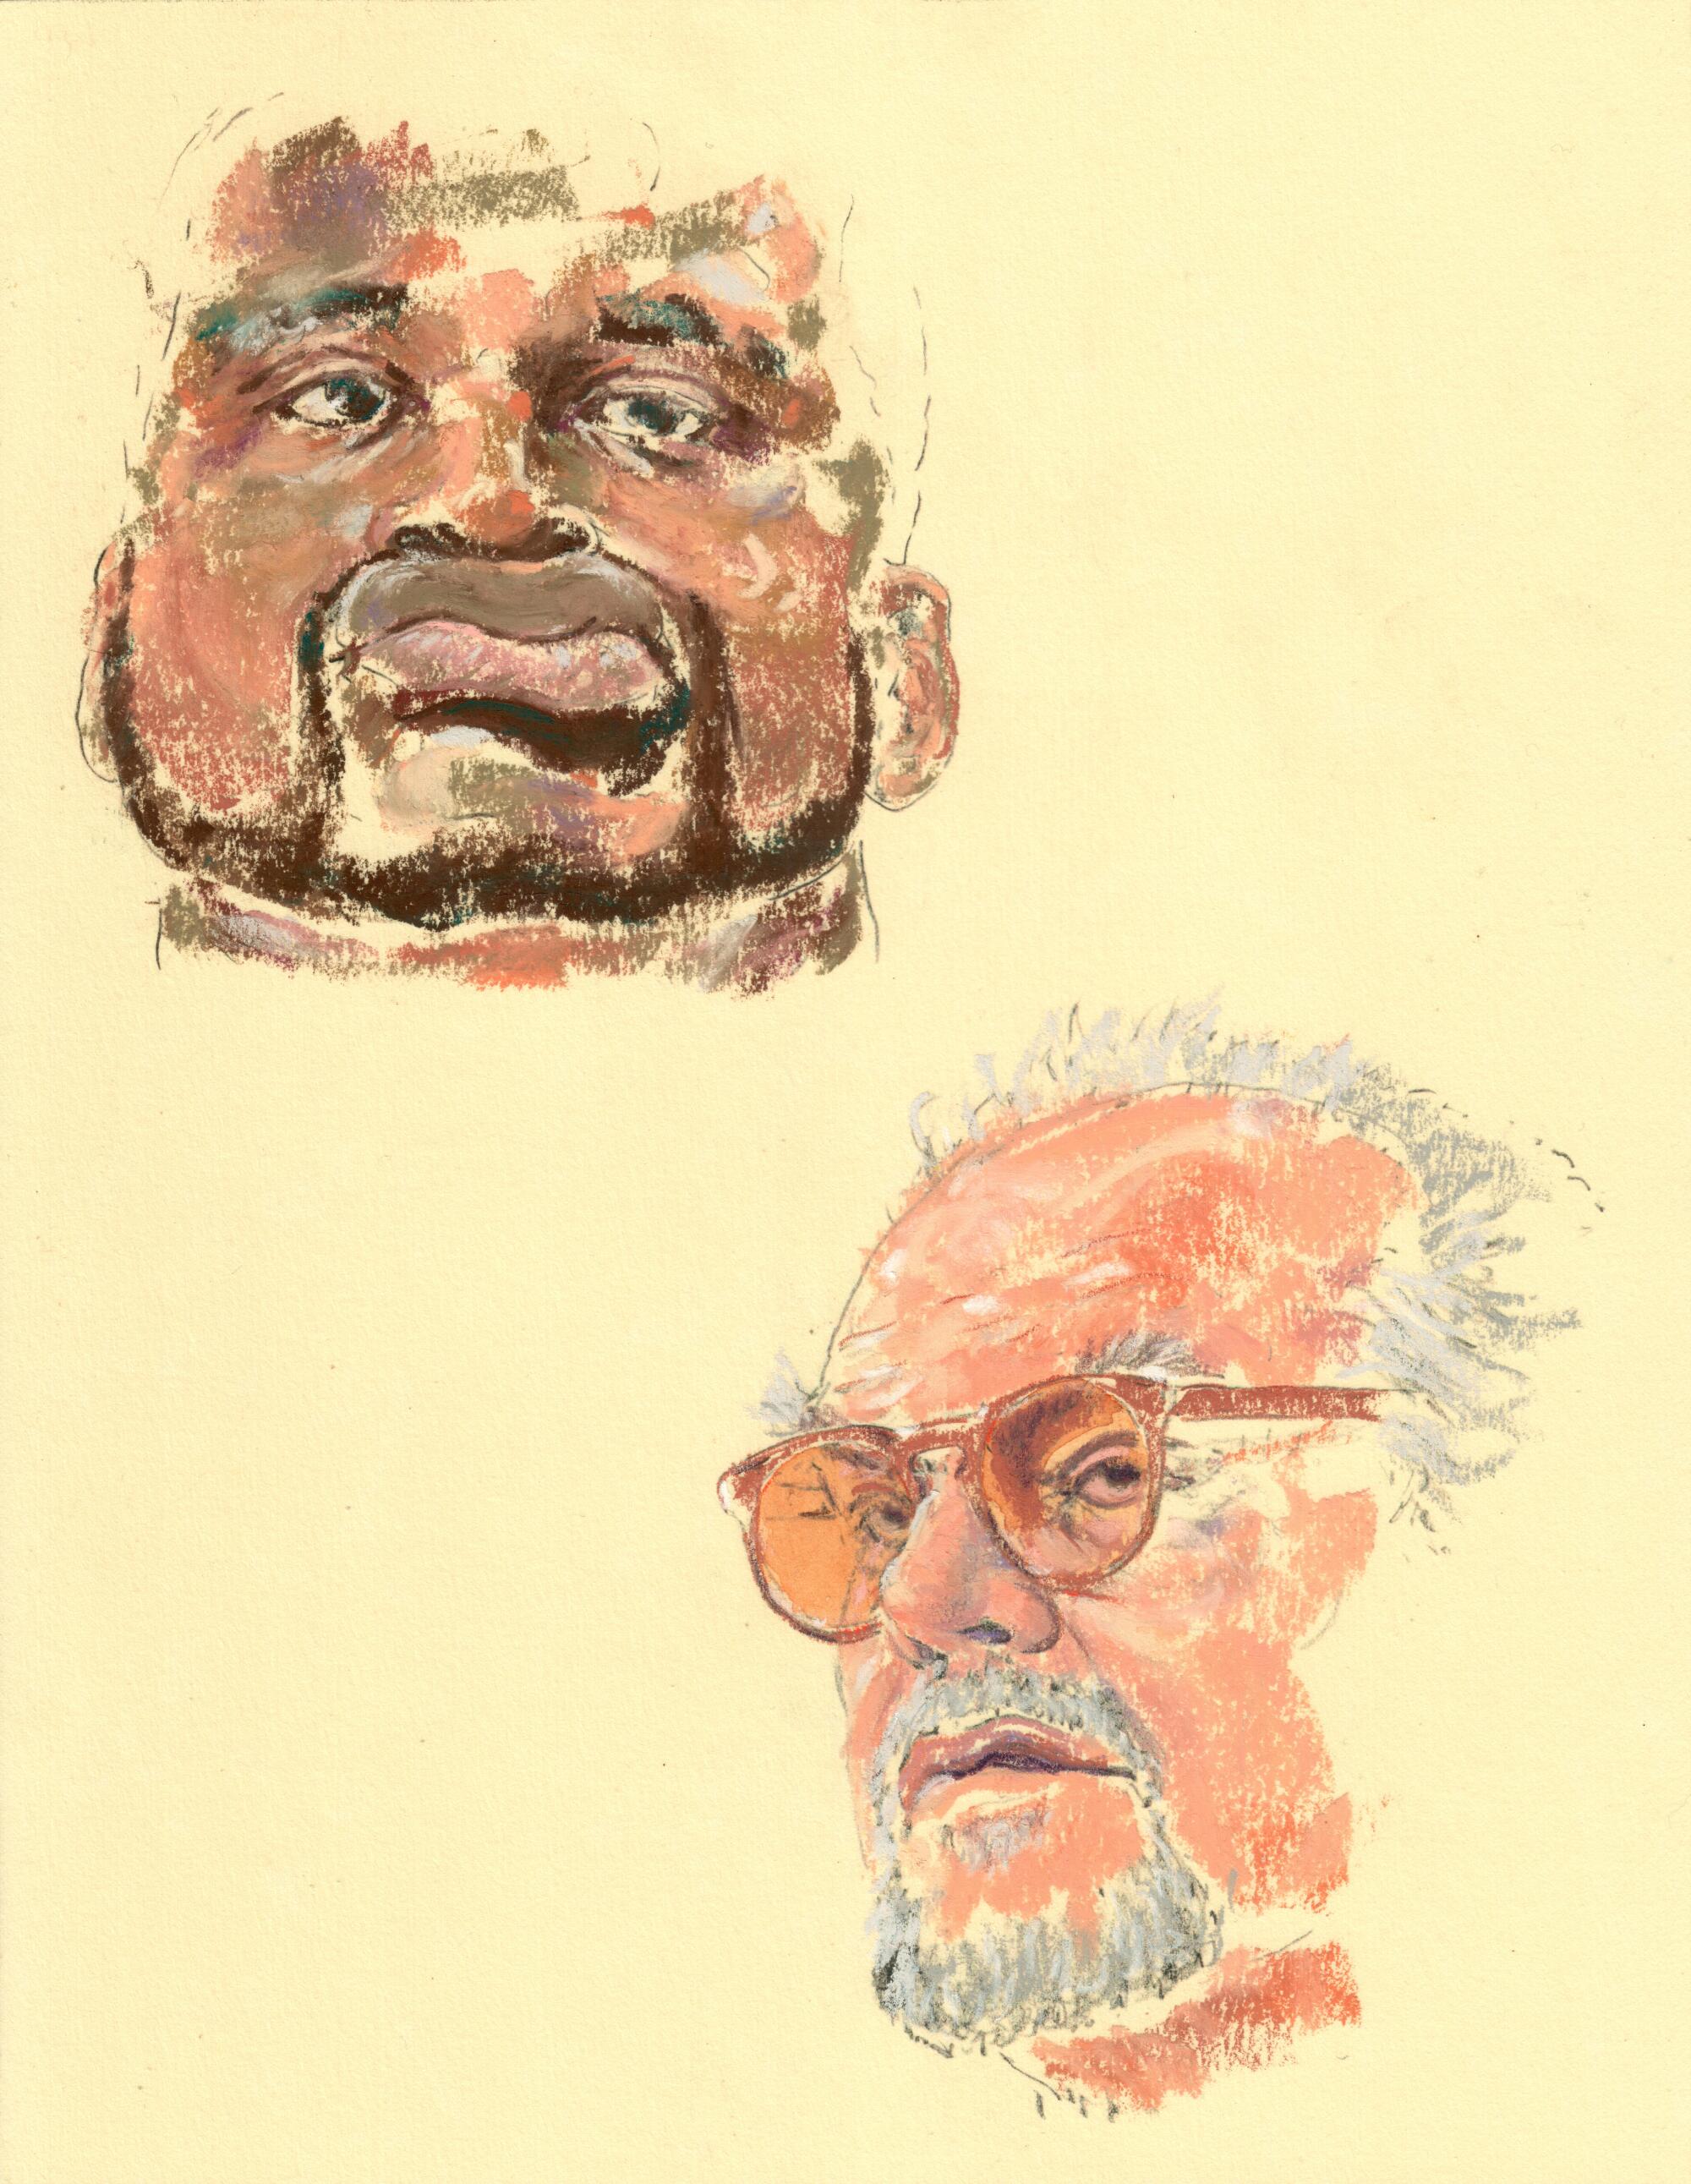 An illustration of the heads of two men